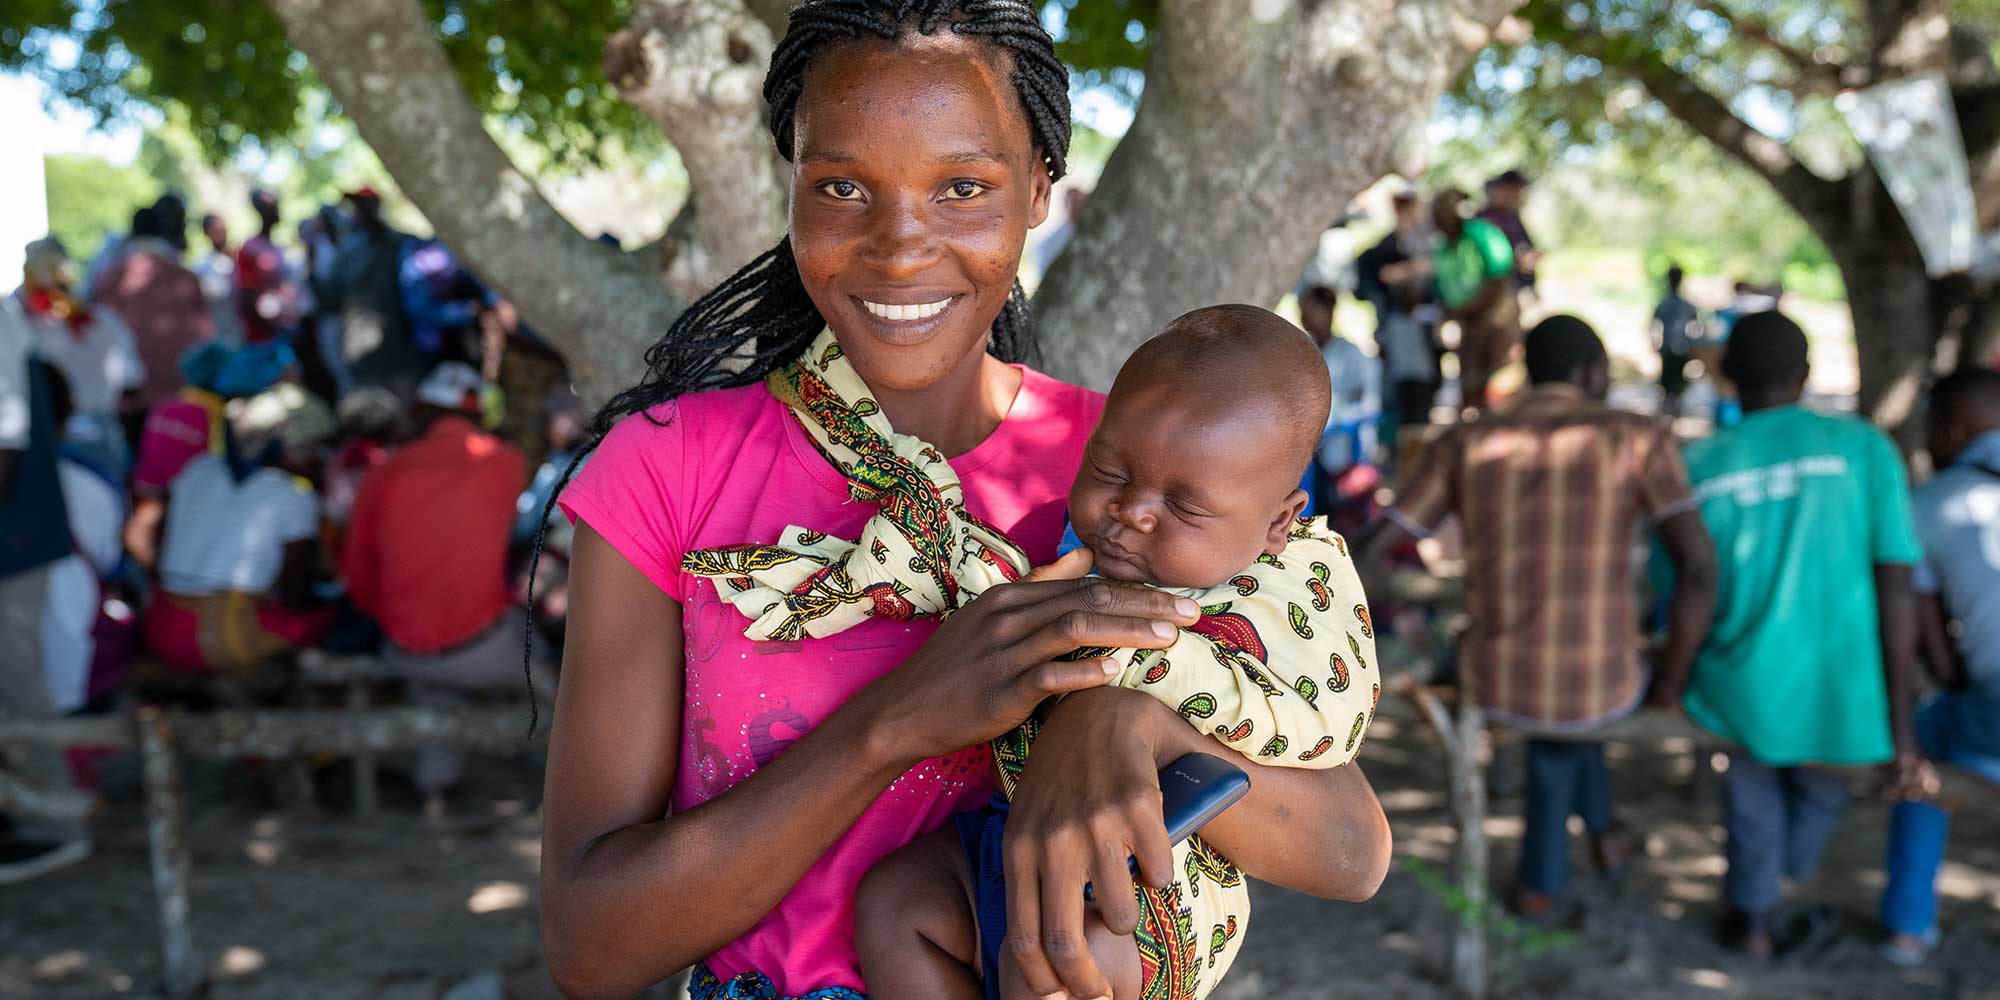 A mother and her child at a community health outreach session in a rural area north-west of Maputo. Credit: Gavi/2020/Svetlomir Slavchev